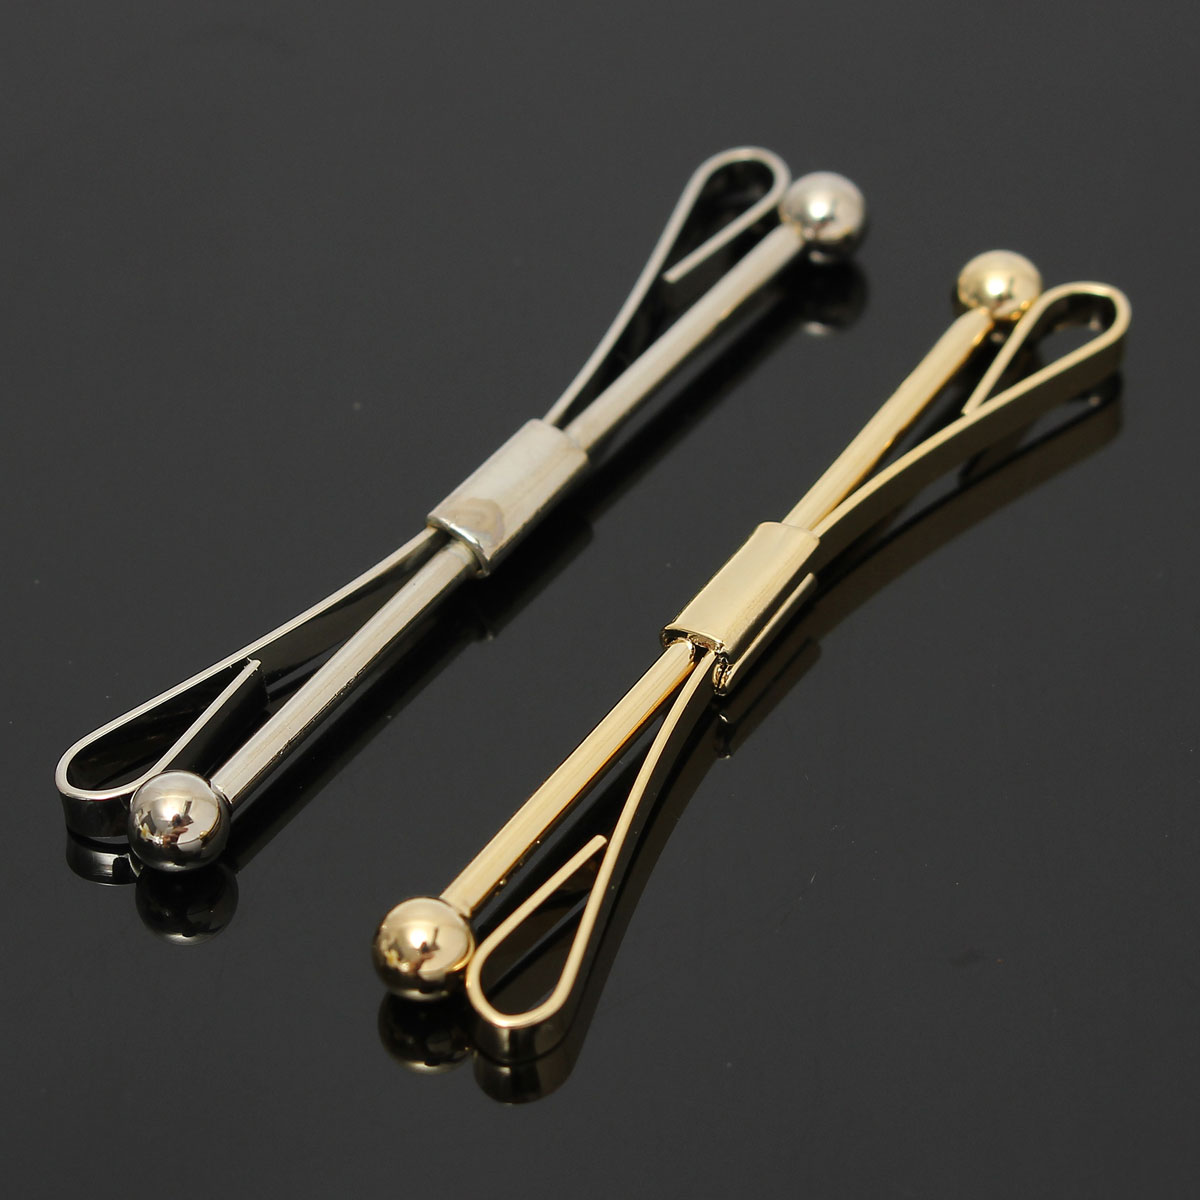 Men-Silver-Gold-Necktie-Tie-Clip-Bar-Clasp-Cravat-Pin-Skinny-Collar-Brooch-Without-Chain-1027211